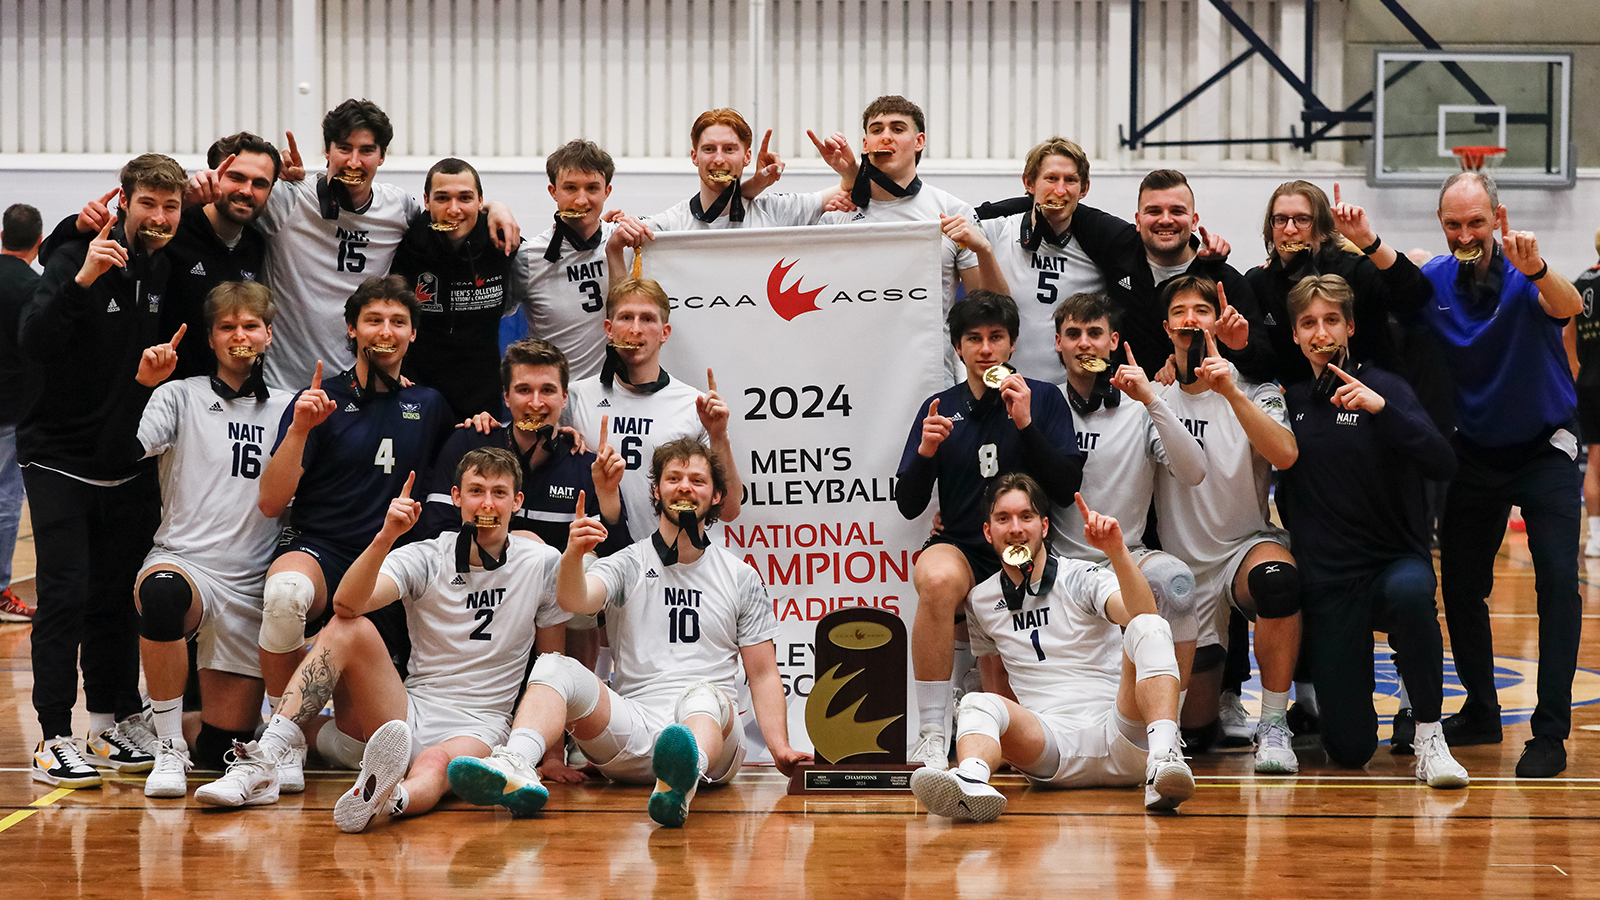 NAIT earns their first CCAA Men's Volleyball Championship